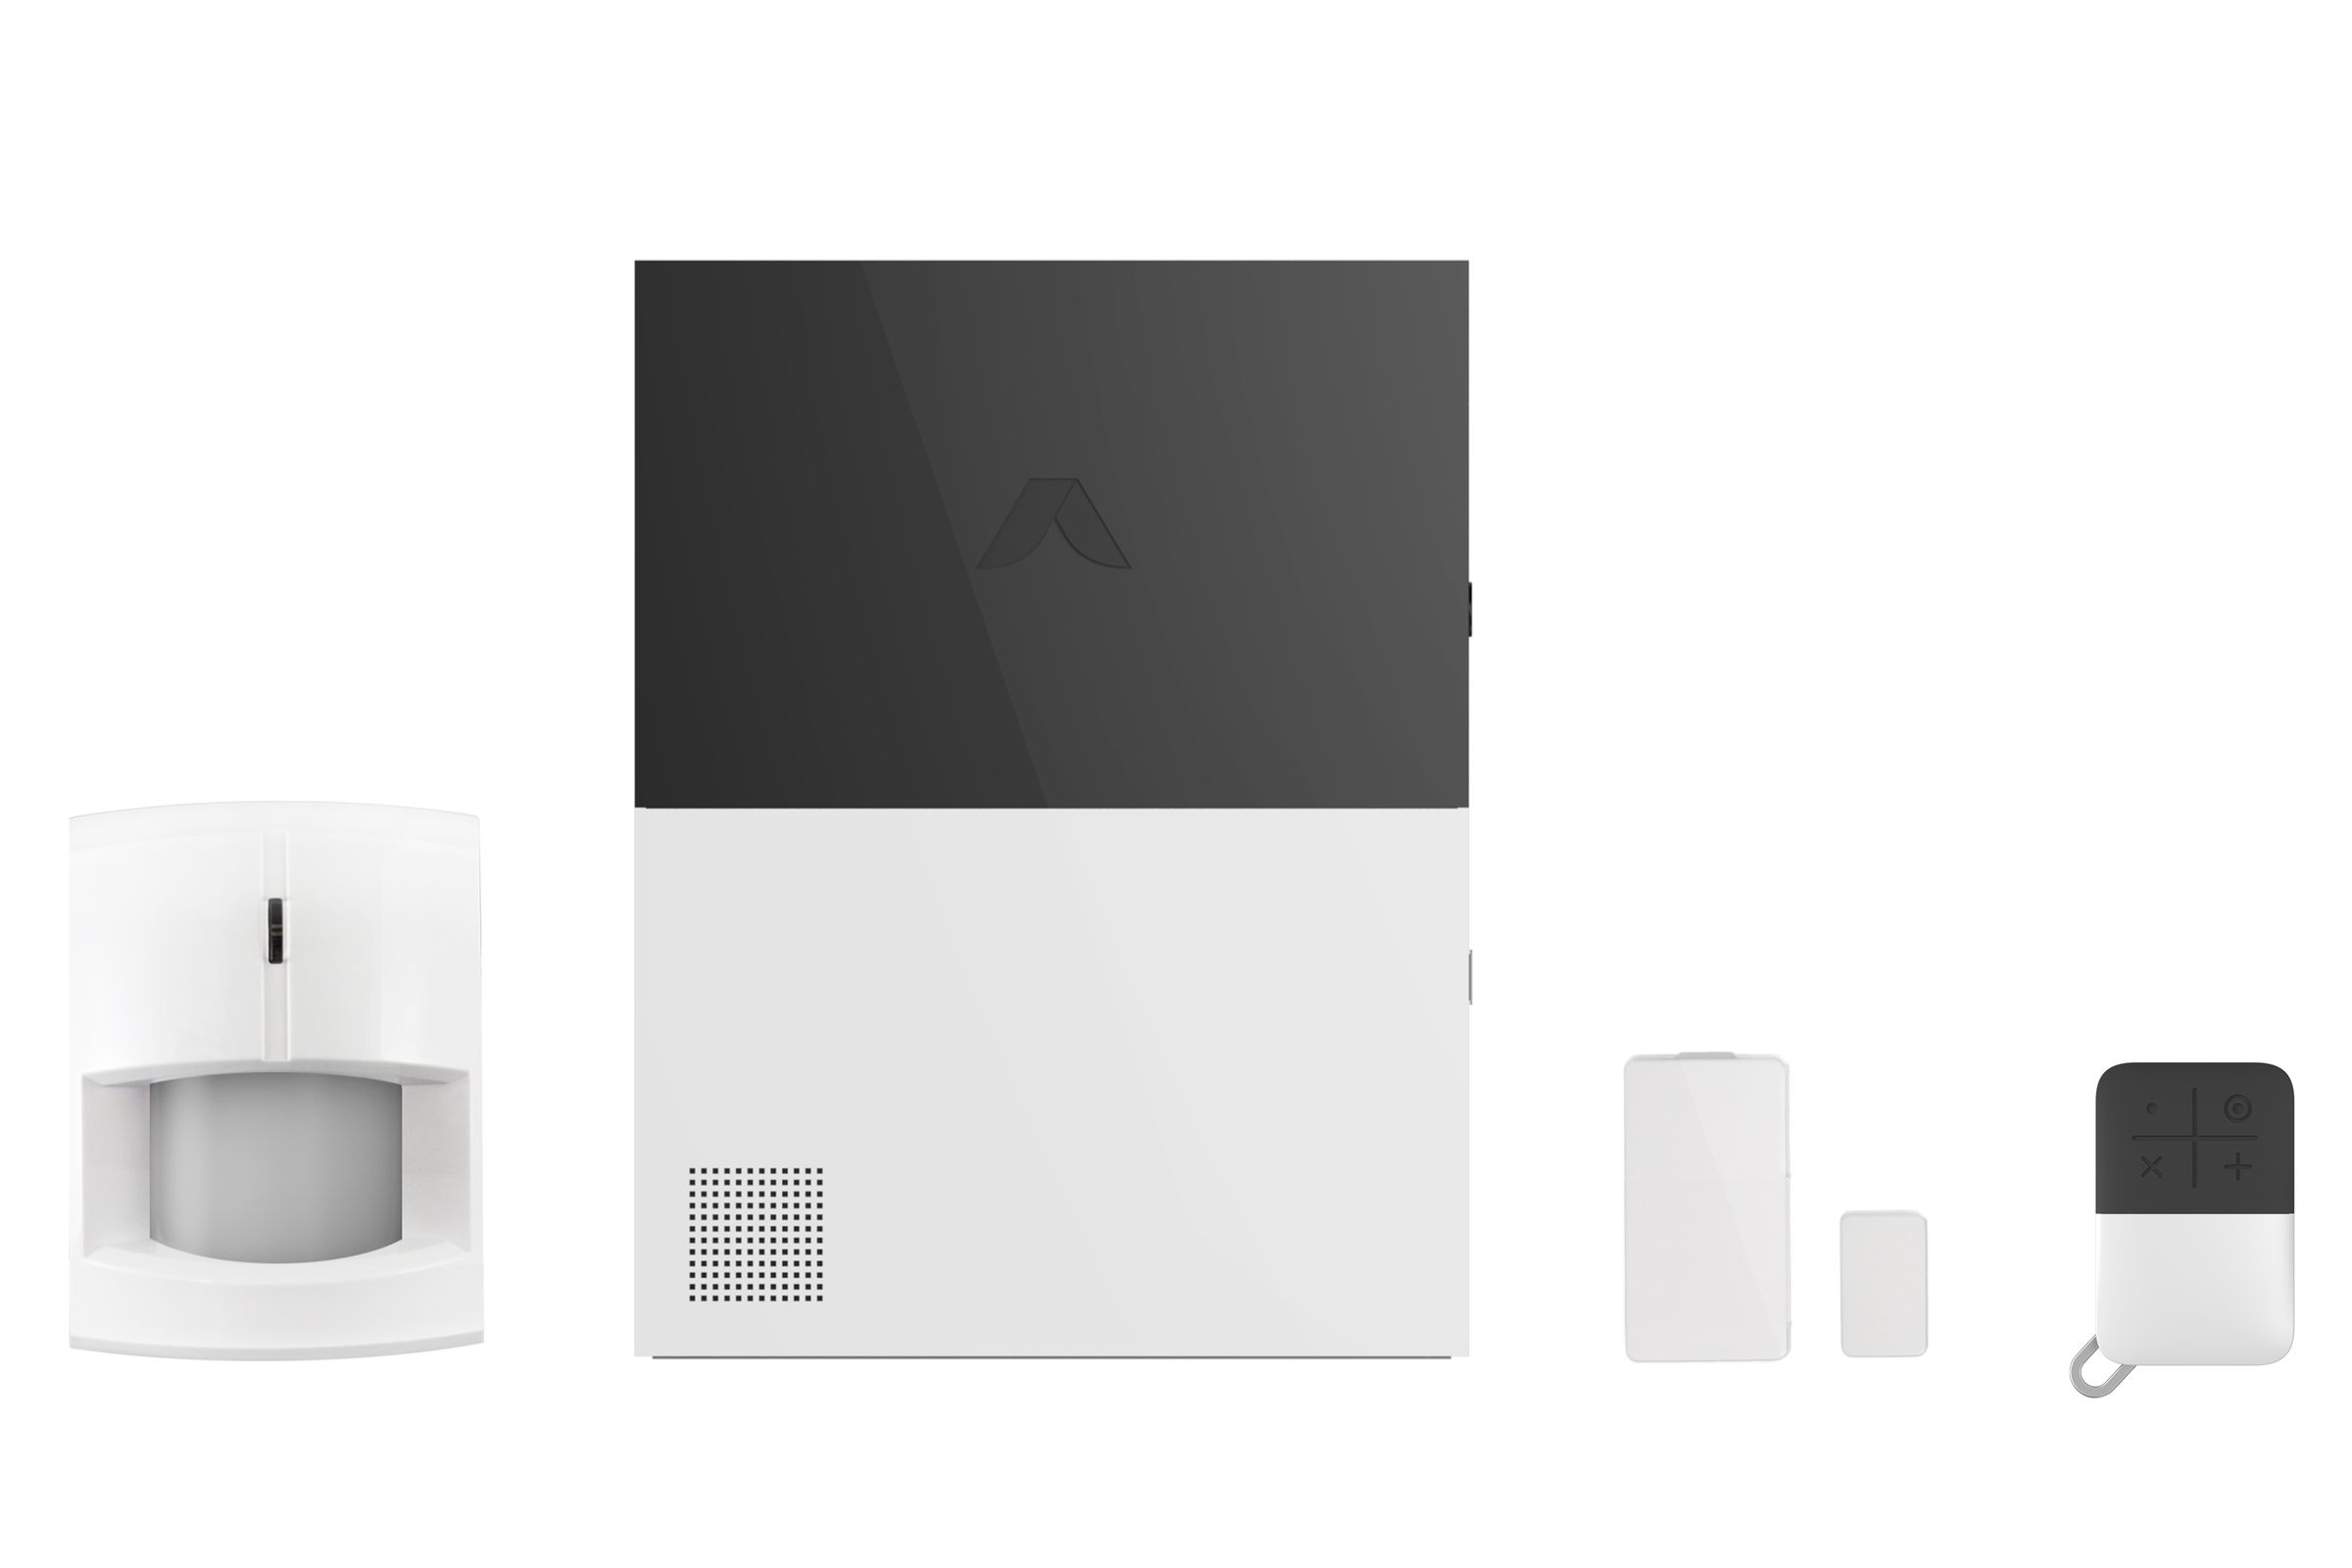 Abode motion sensor, gateway, door / window sensor, and key fob (pictured left to right).